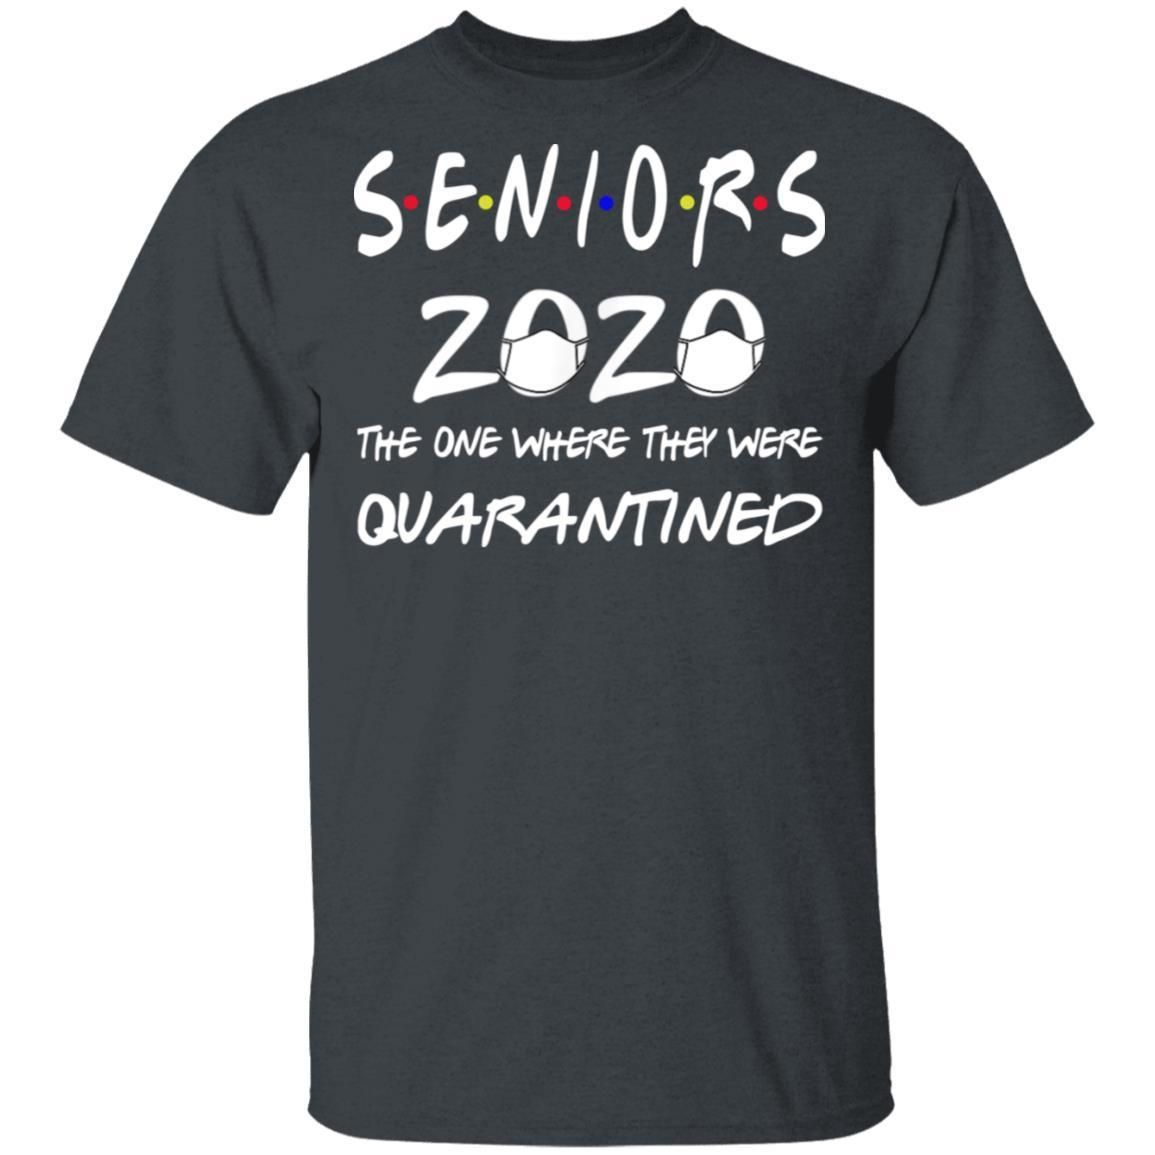 Seniors 2020 The ones where they are quarantined shirts